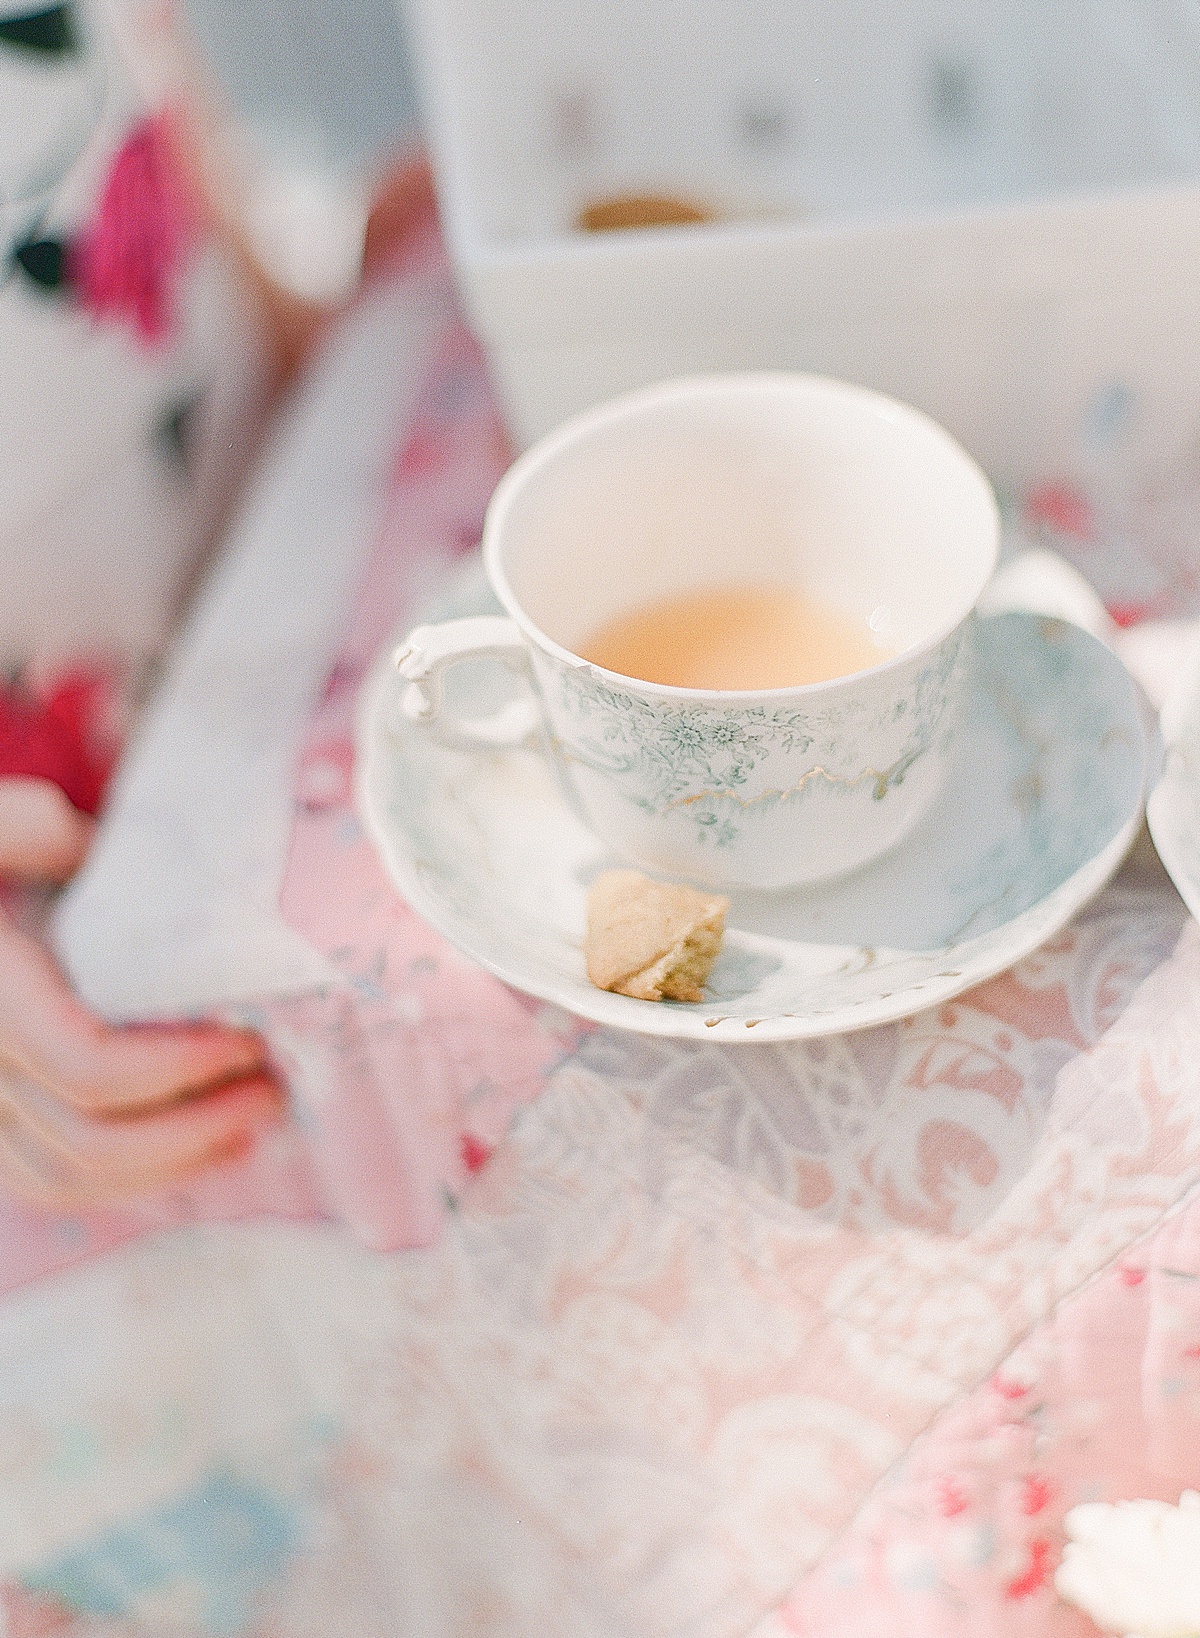 Tea Cup and Saucer on Quilt Photo 